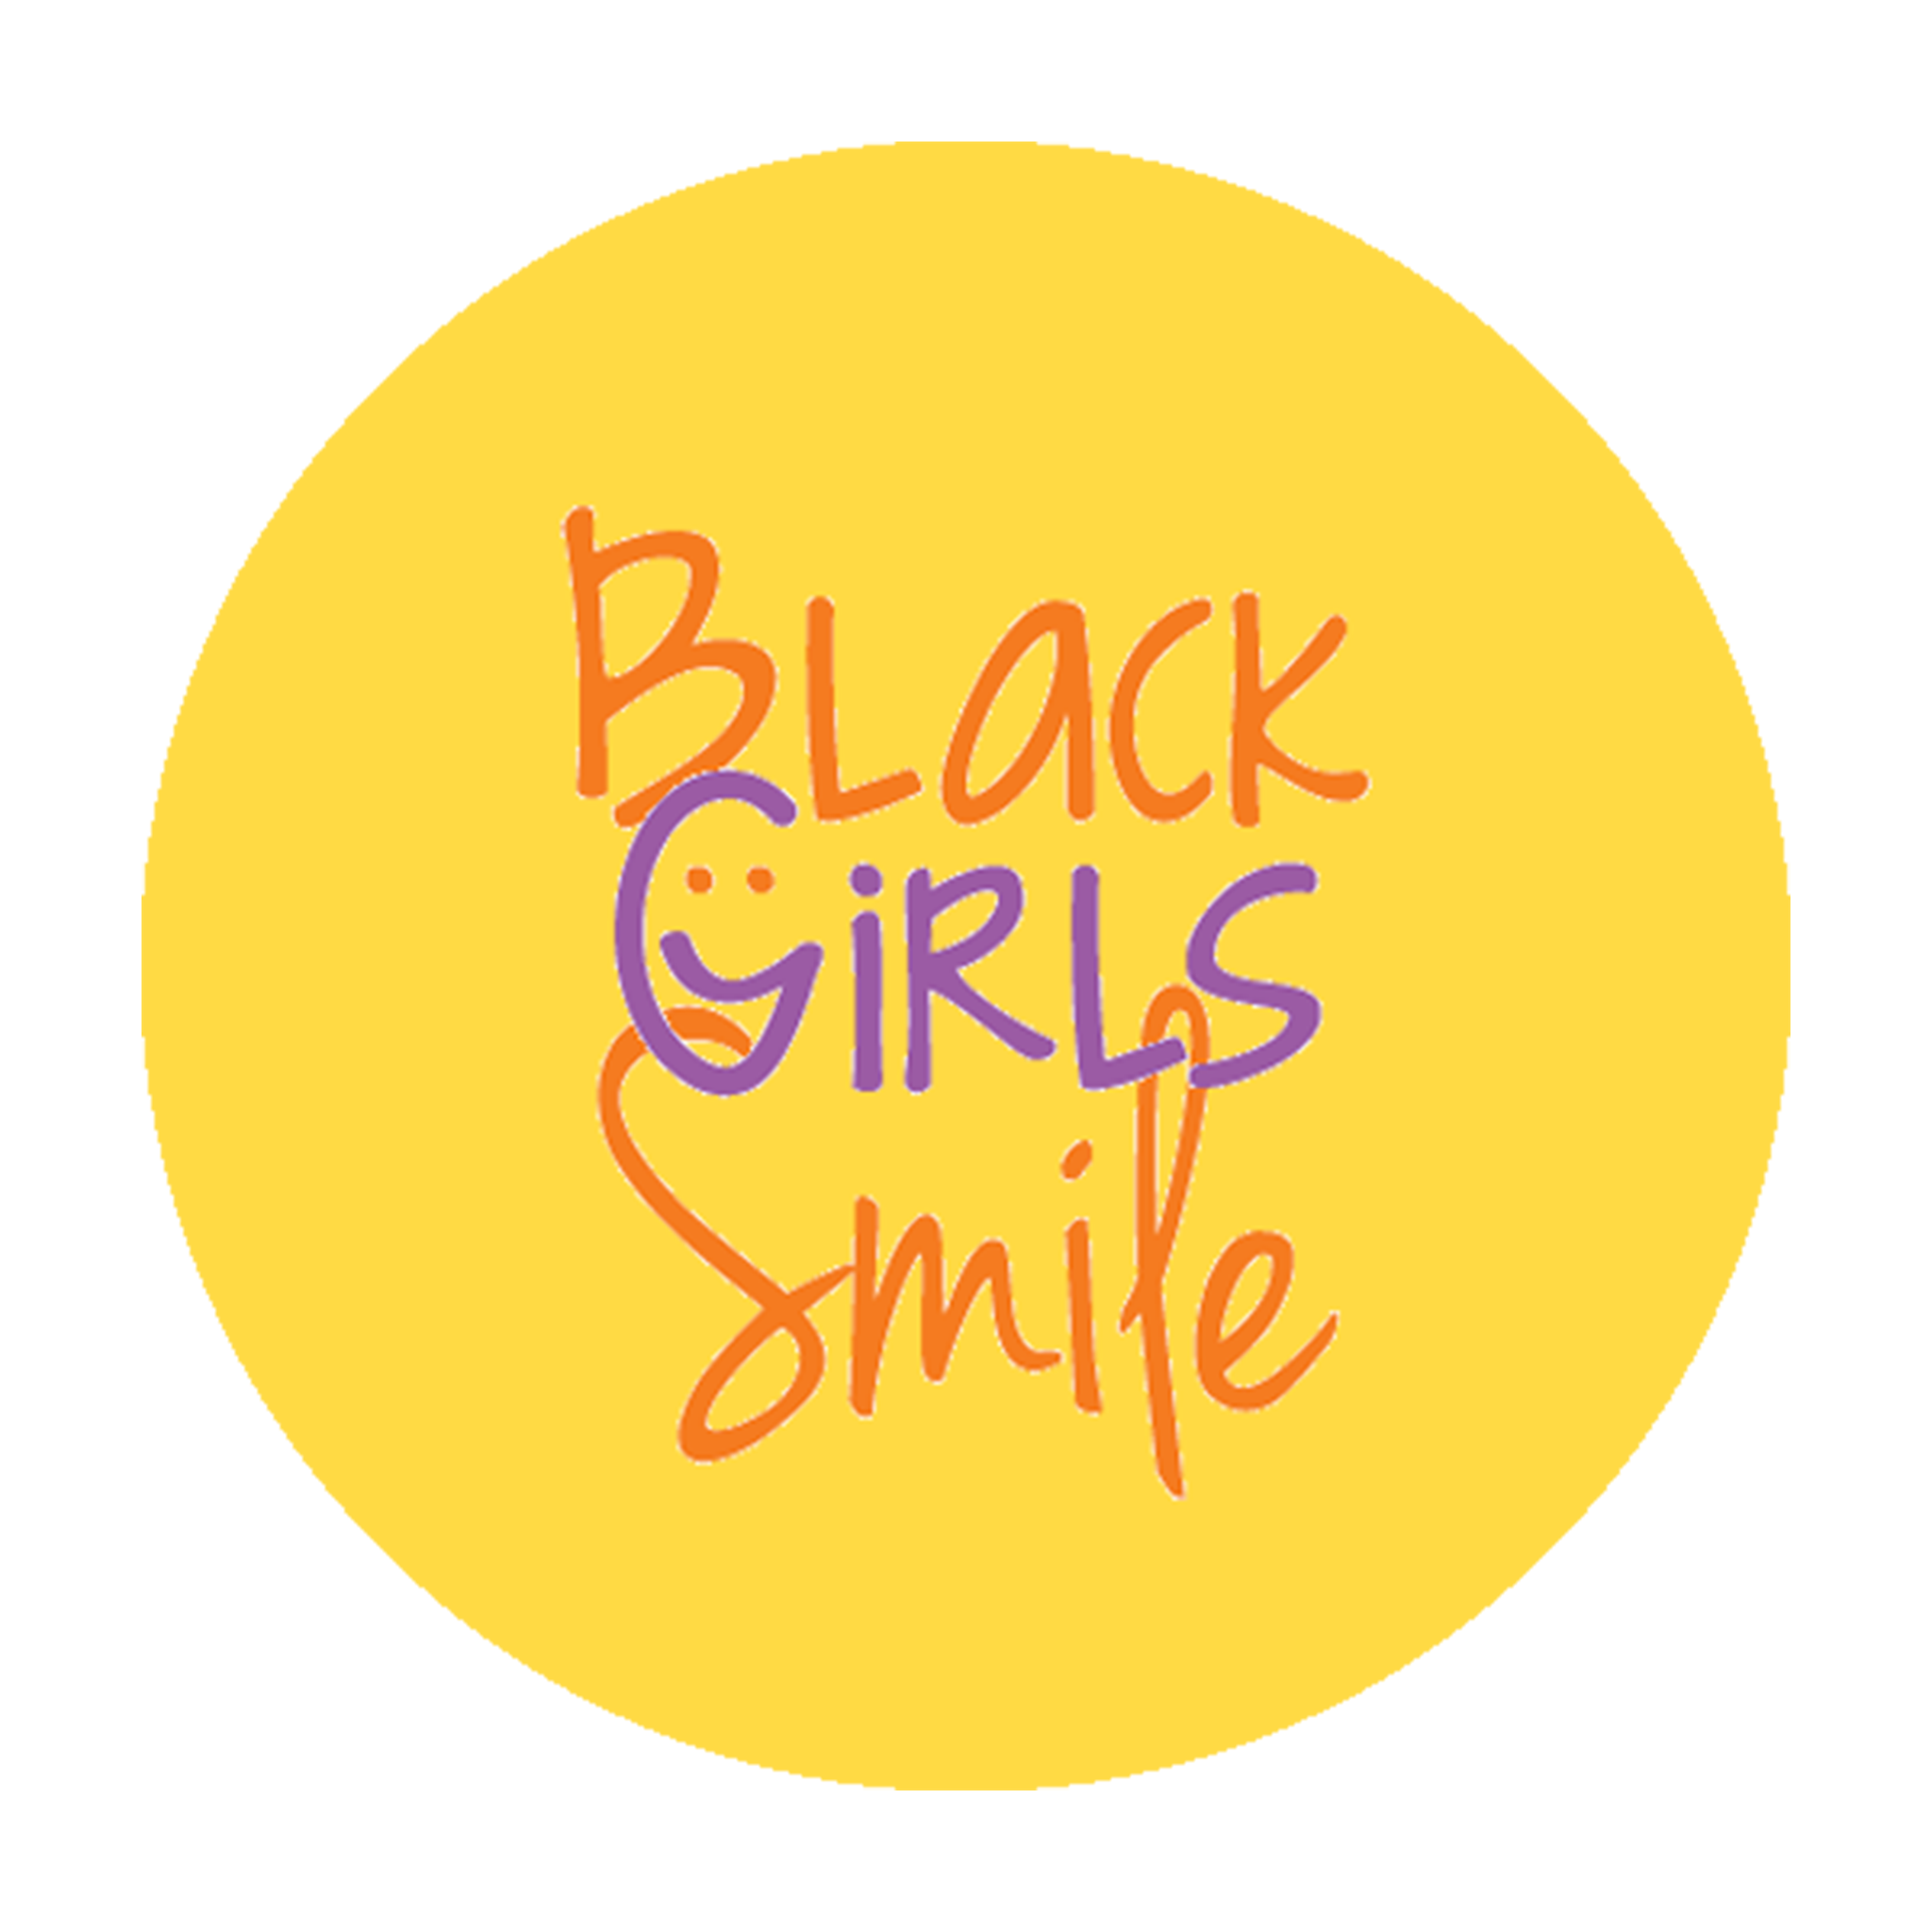 Logo of Black Girls Smile - organization dedicated to supporting the mental health and wellness of young African American females.